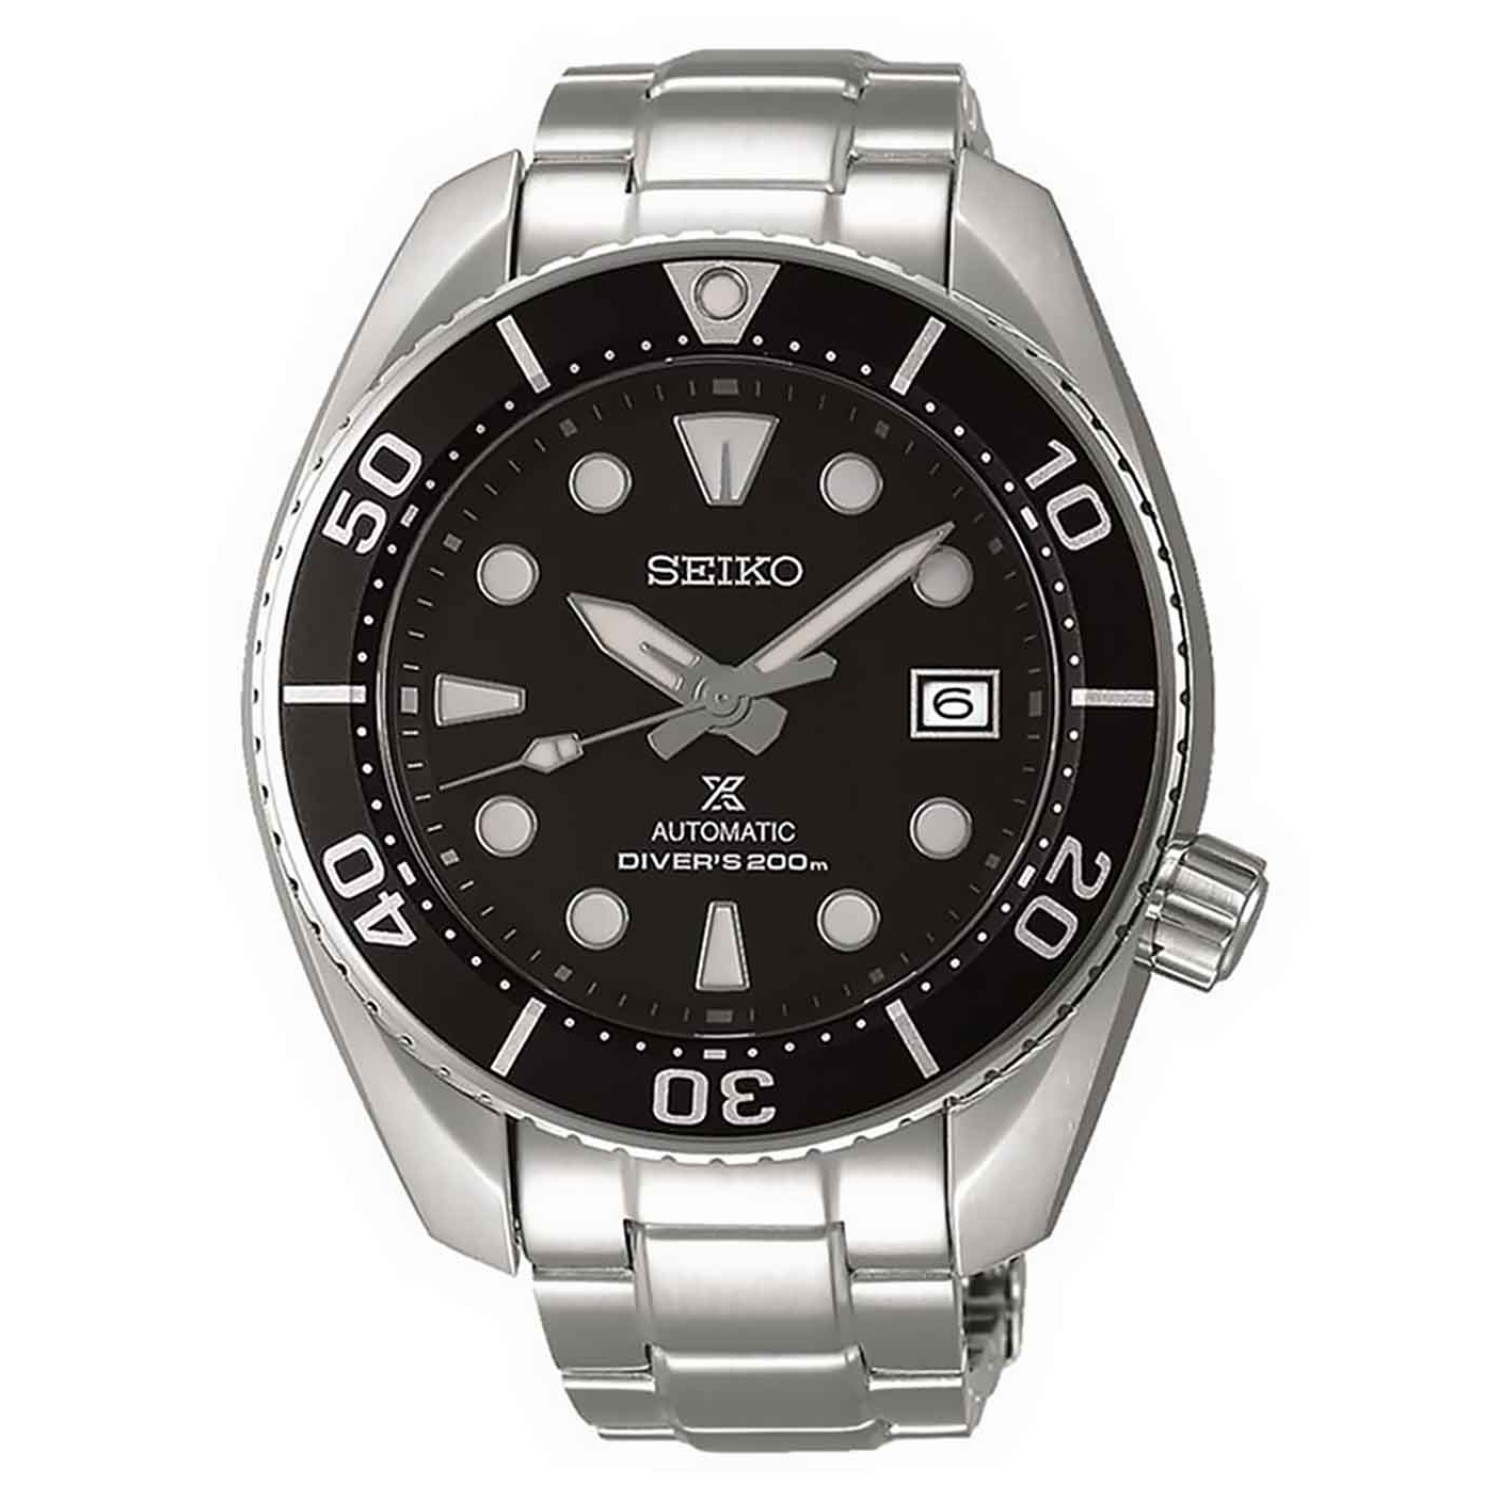 SPB101J SEIKO Gents Prospex Automatic Divers Watch. 3 Months No Payments and Interest for Q Card holders Oxipay is simply the easier way to pay - use Oxipay and well spread your payment up to a maximum of $1500 over 4 easy instalments. No interest. Ever!T